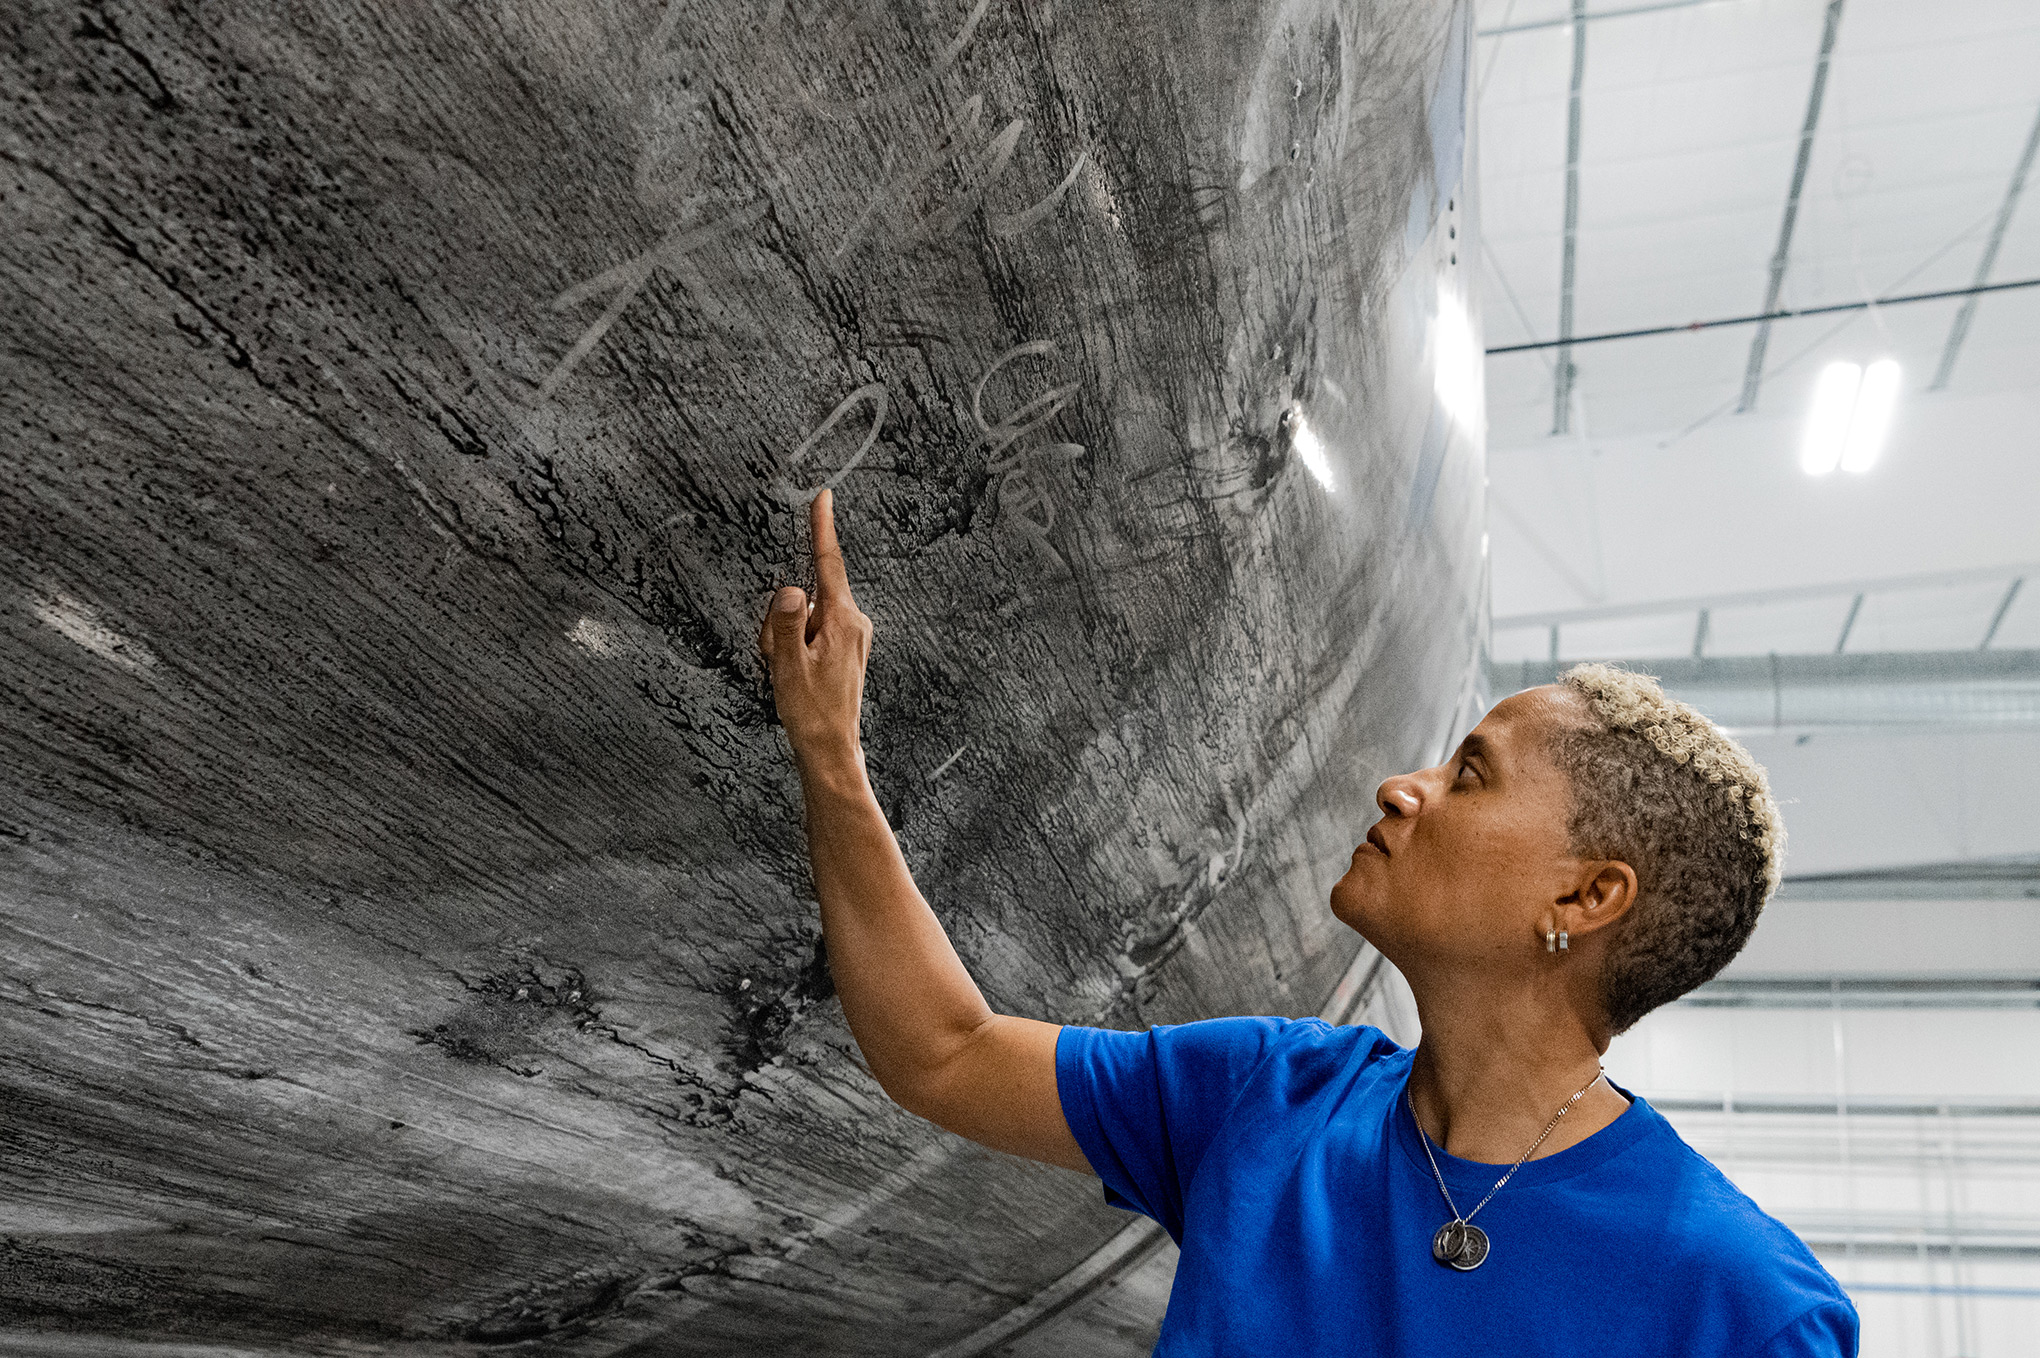 Dr. Sian Proctor signing the Falcon 9 reusable rocket booster that will launch the Inspiration4 crew into space. It has become a new tradition for SpaceX crews to sign their reusable vehicles. (John Kraus—Inspiration4)